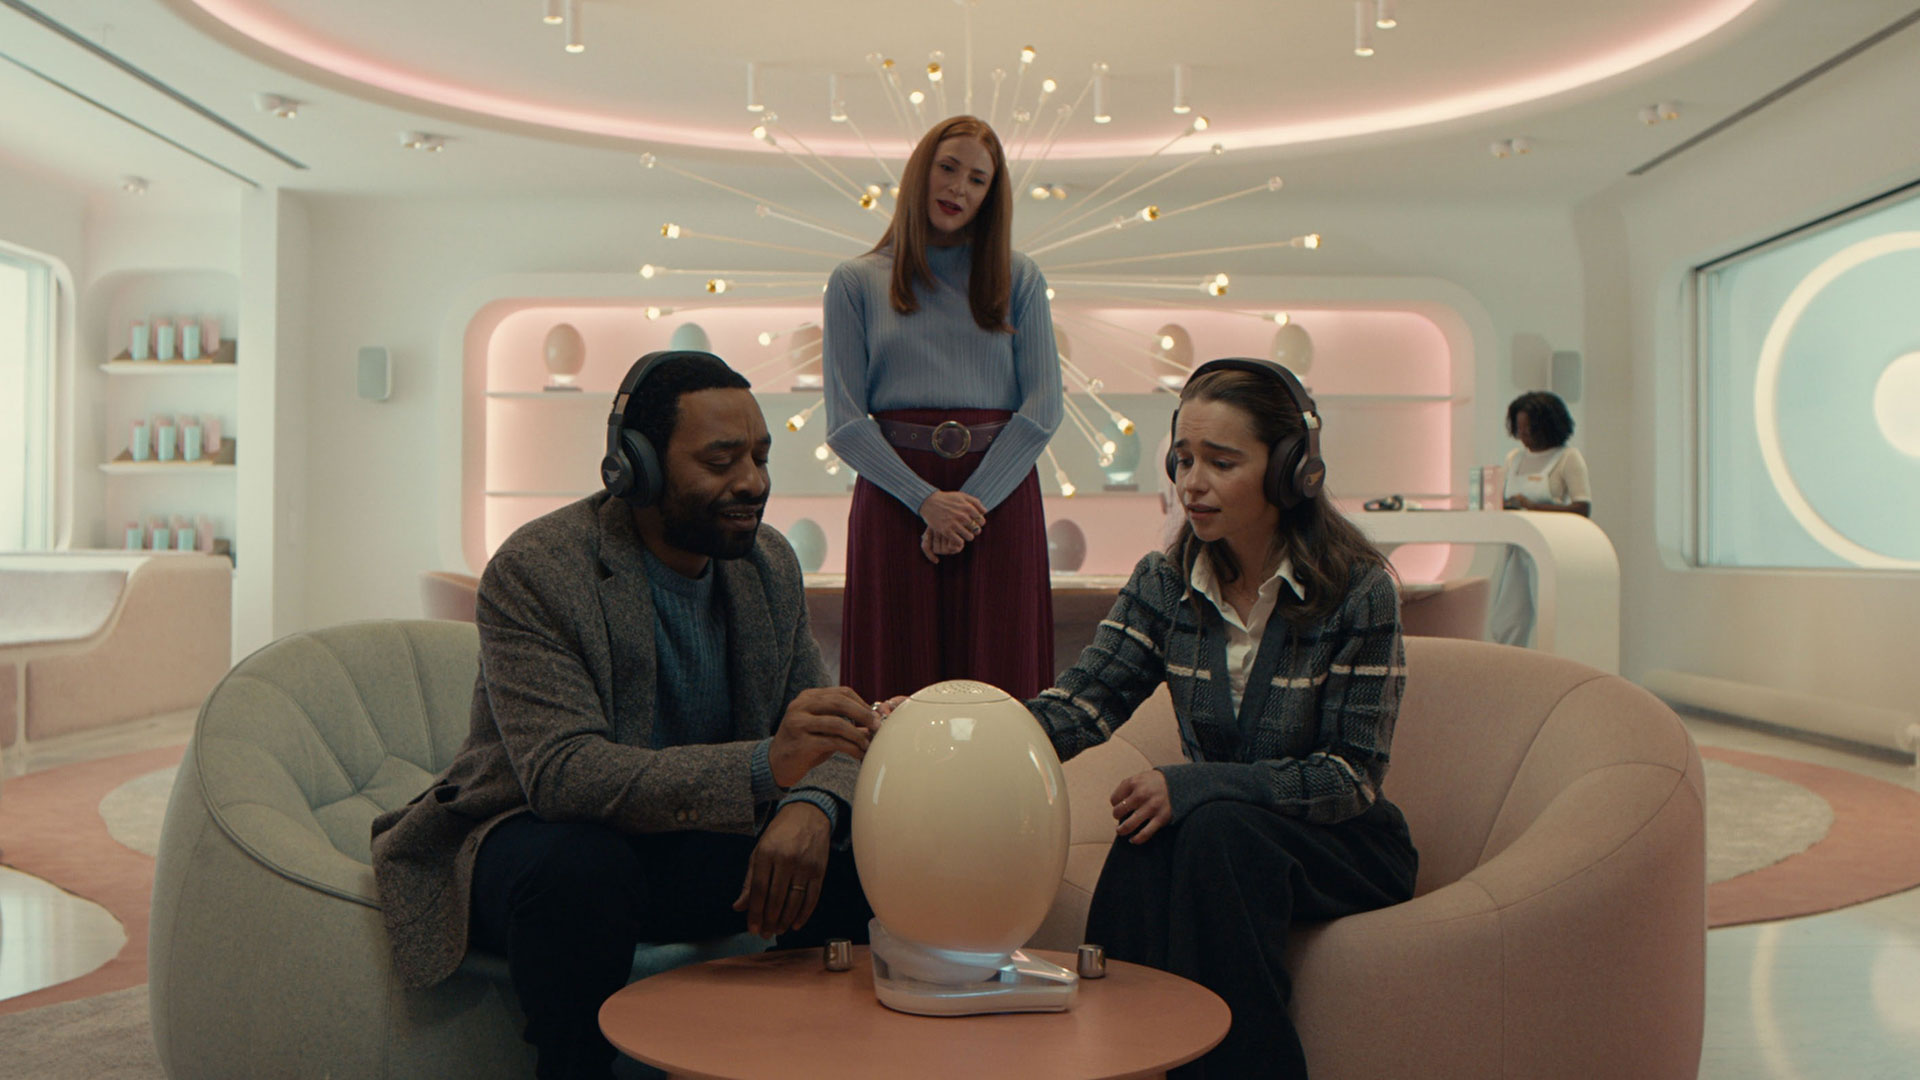 Emilia Clarke, Chiwetel and Rosalie Craig appear in a still from <i>The Pod Generation</i> by Sophie Barthes, an official selection of the Premieres program at the 2023 Sundance Film Festival. Courtesy of Sundance Institute | photo by Andrij Parekh.